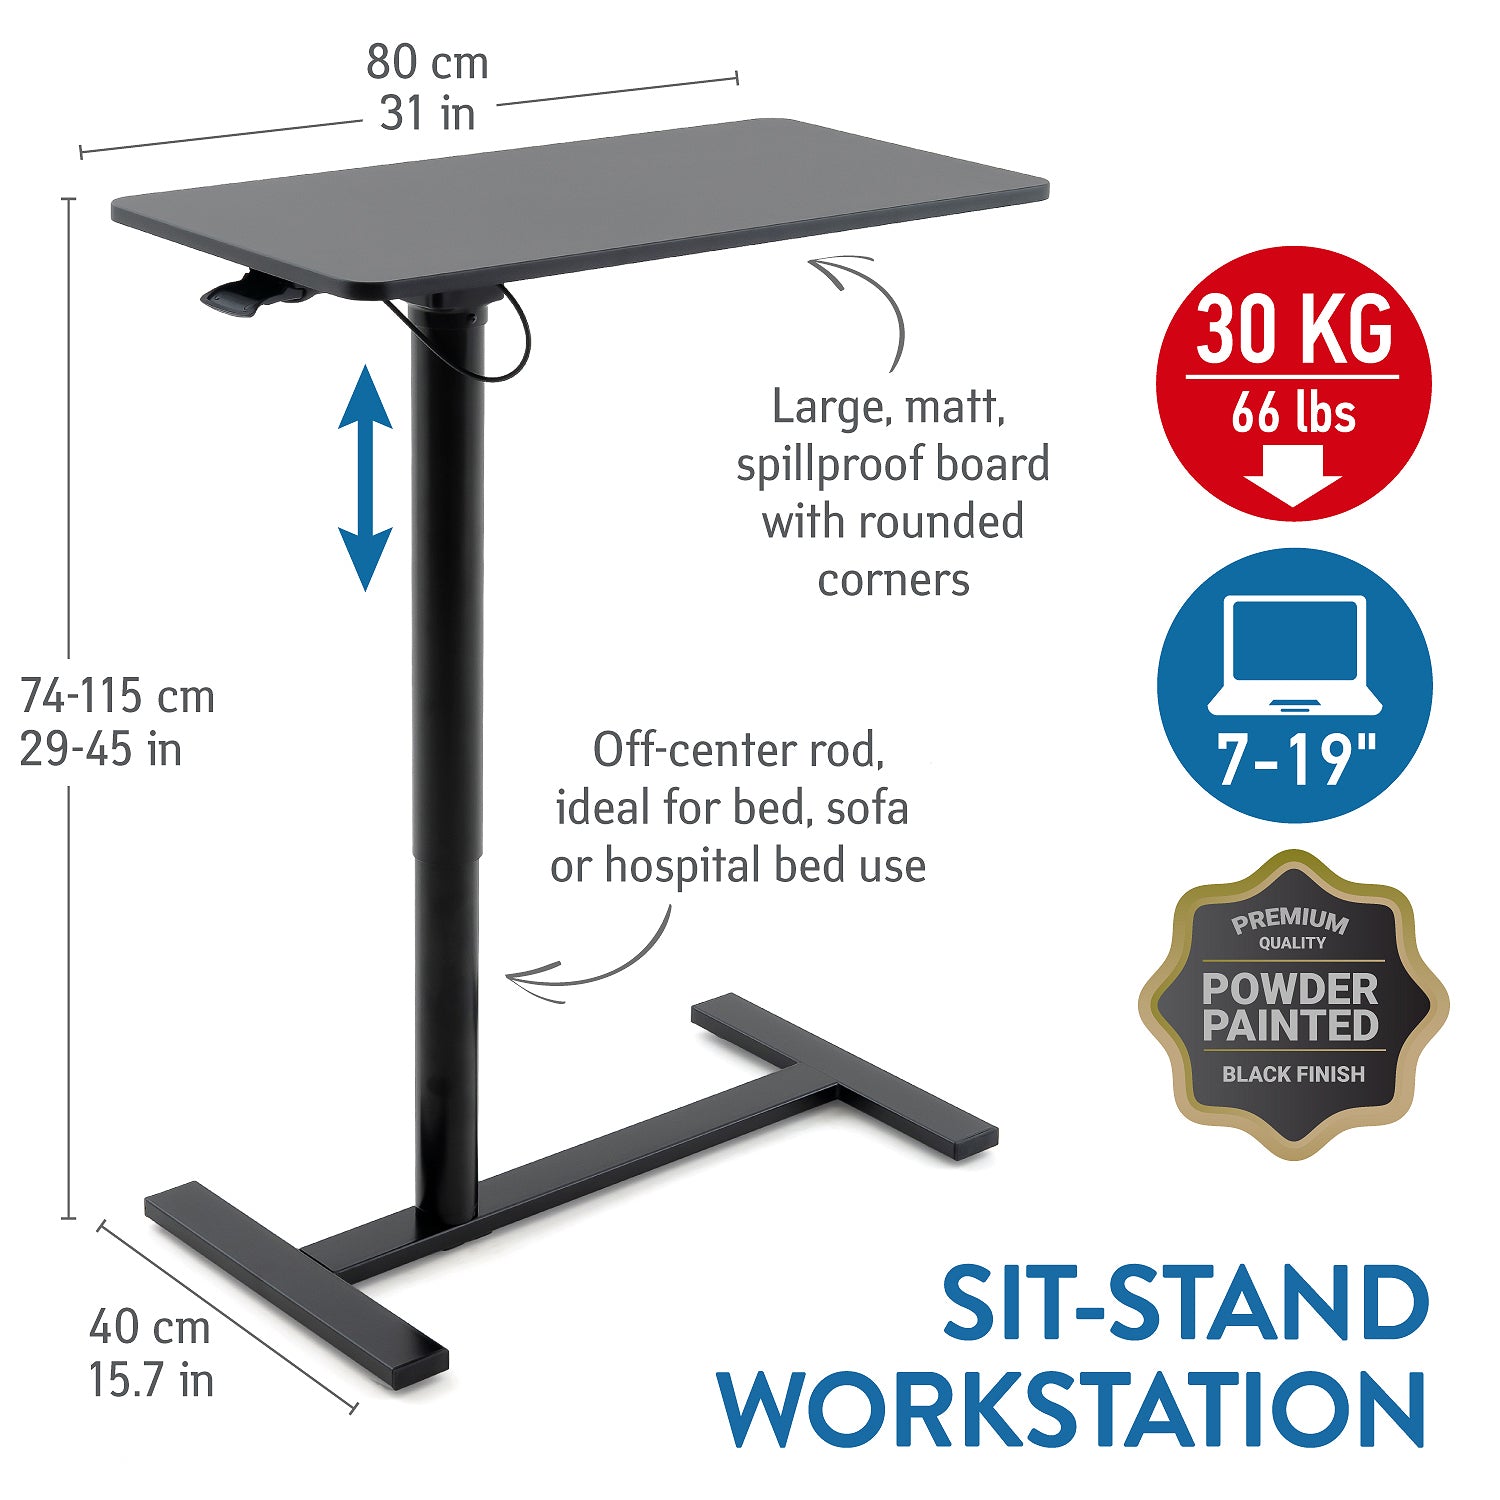 Sit-Stand Workstation with Height Adjustable from 29 to 45in